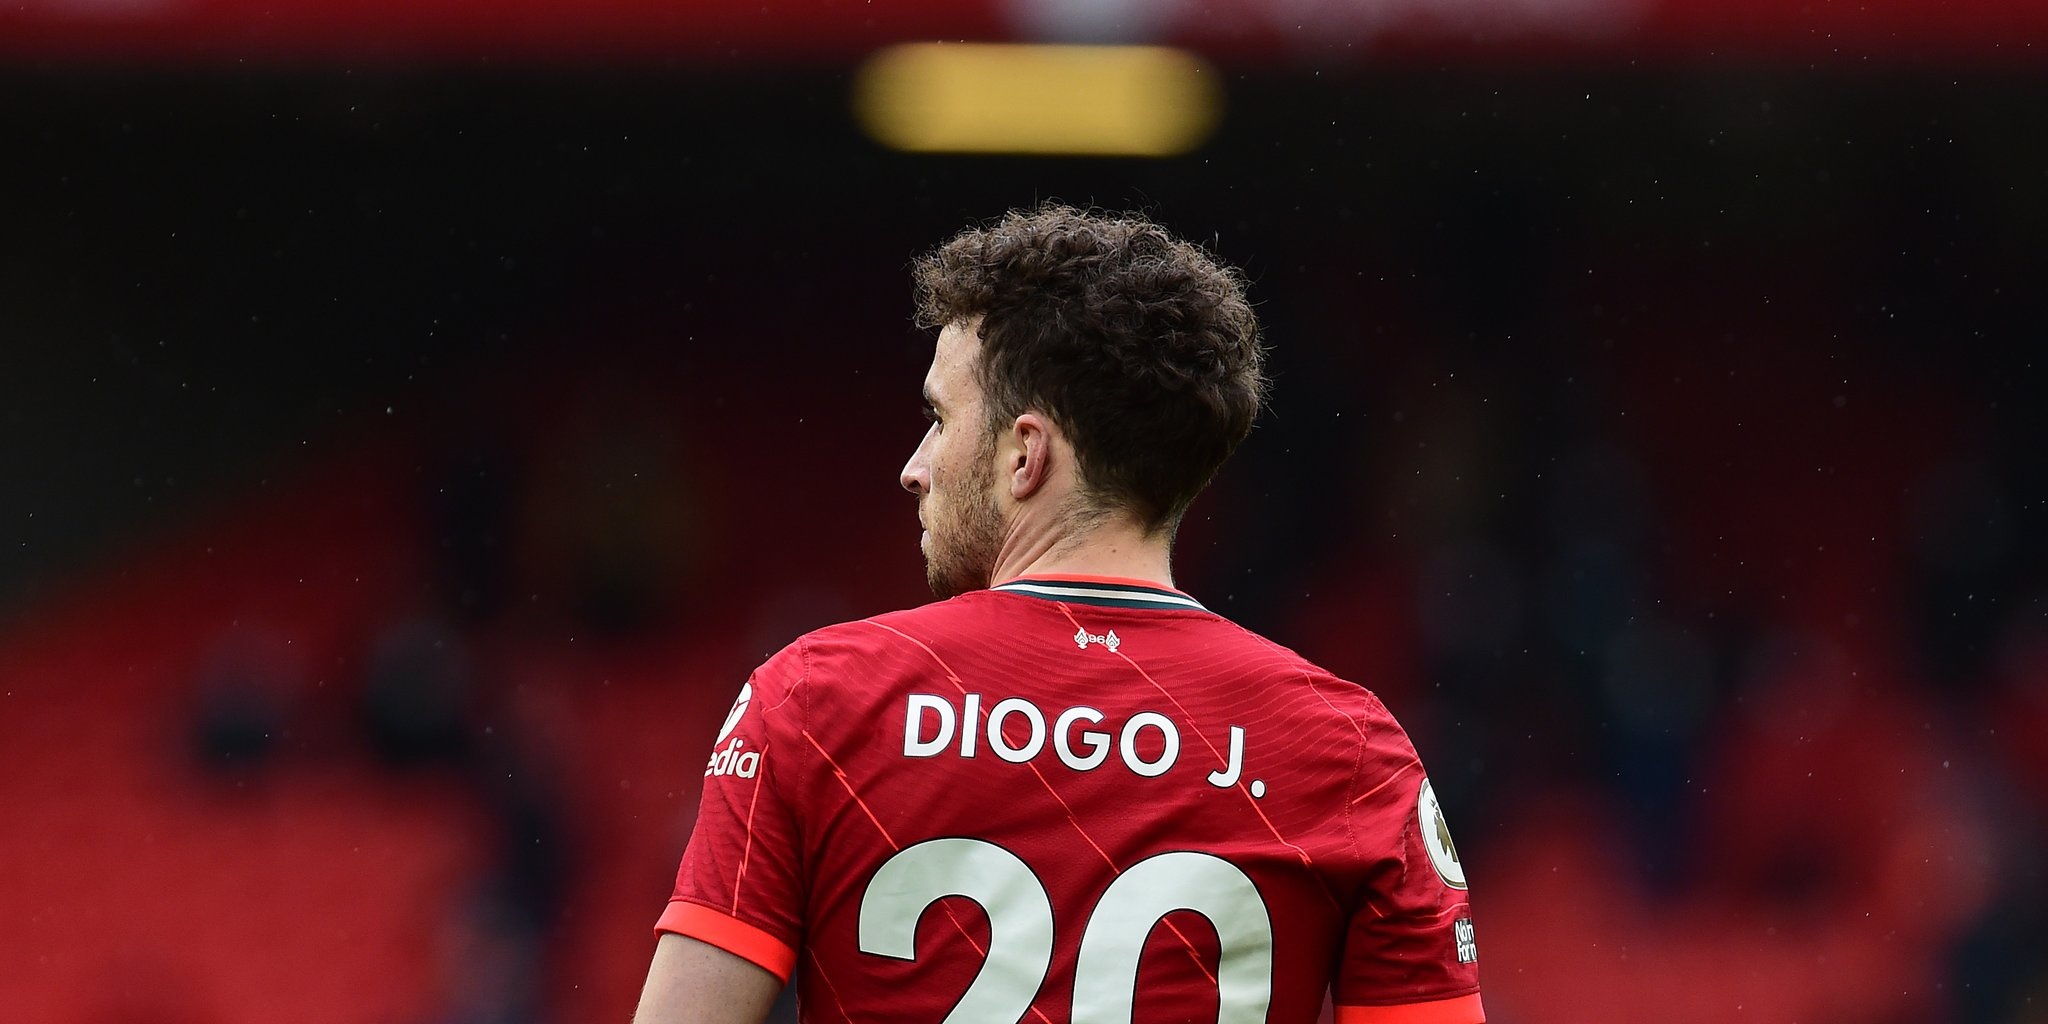 ‘It’s beautiful to see’ – Former Manchester United defender admits his joy at watching Diogo Jota